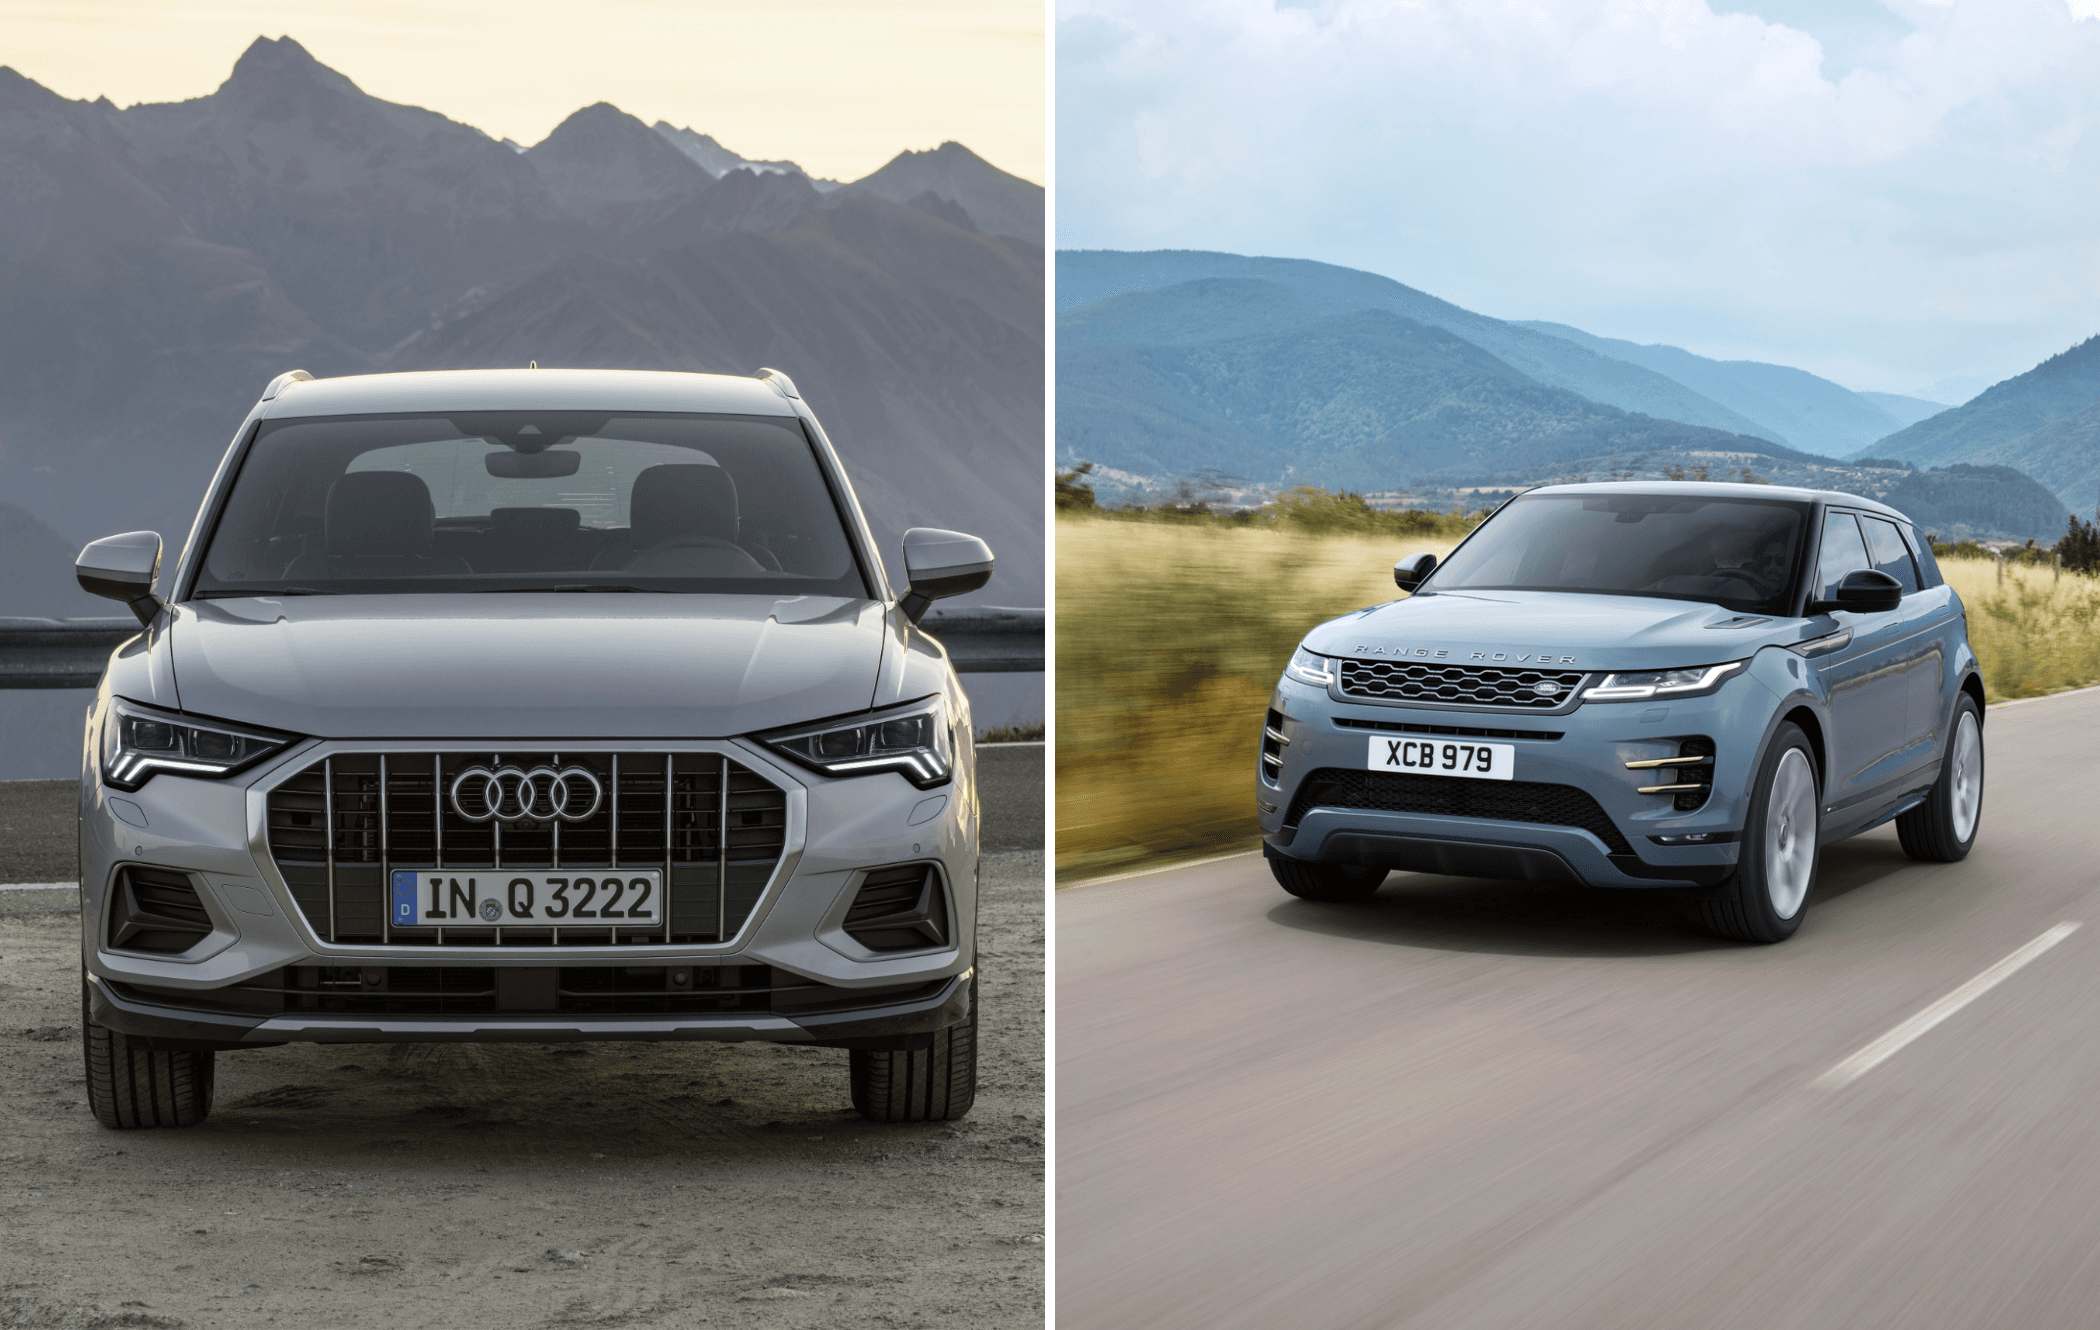 on the left is a silver audi q3 facing the camera and on the right is an evoque driving on a country road